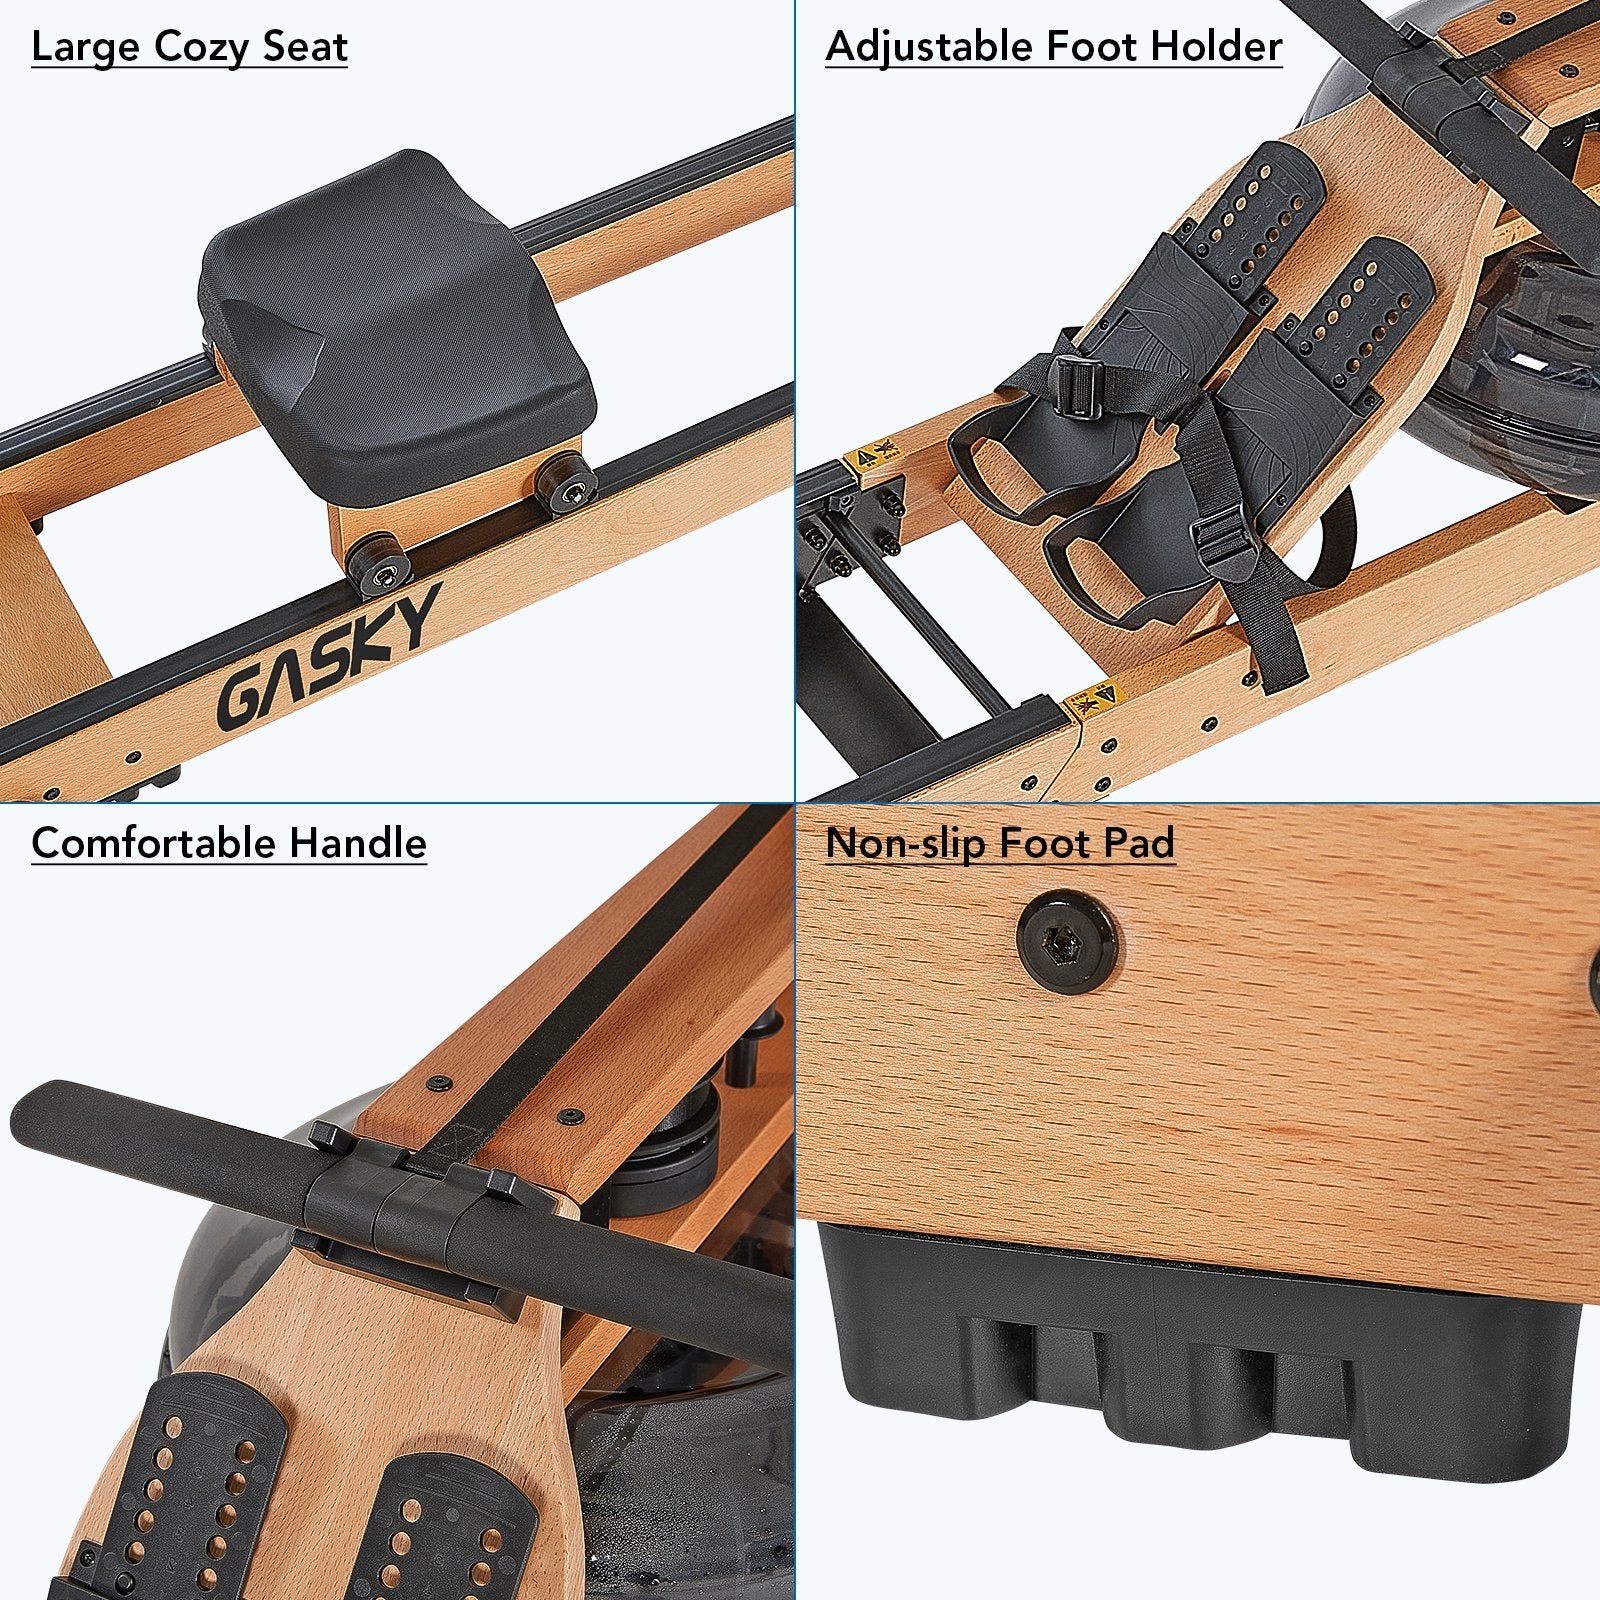 Load image into Gallery viewer, Water Rowing Machine for Home Use Oak Wooden Rower with LCD Monitor - NAIPO
